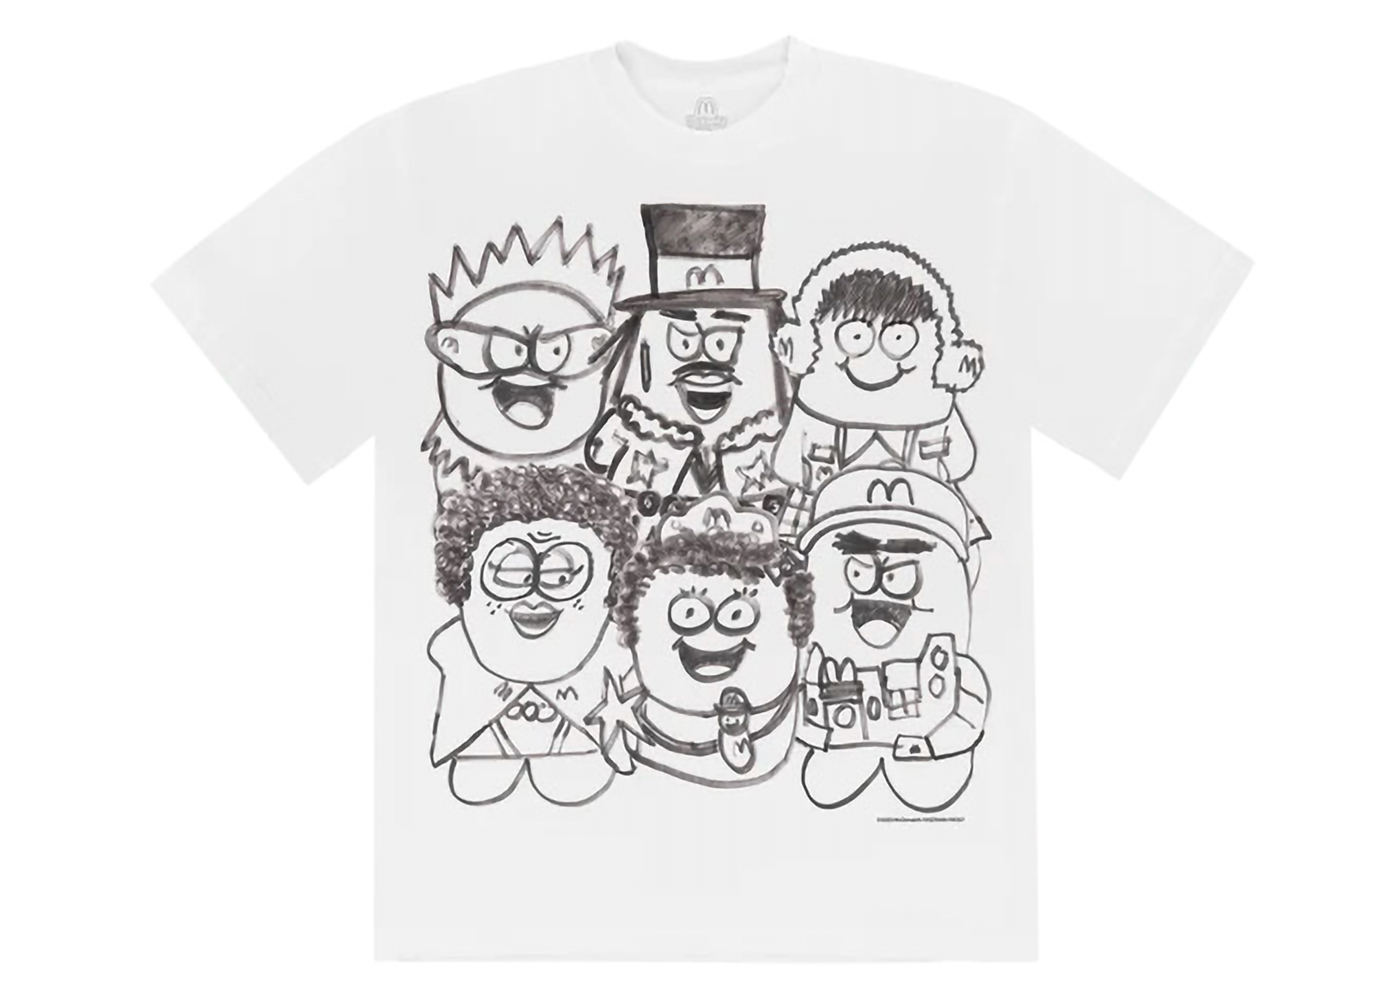 Kerwin Frost x McDonald's Mcnugget Buddies Sketch Tee White